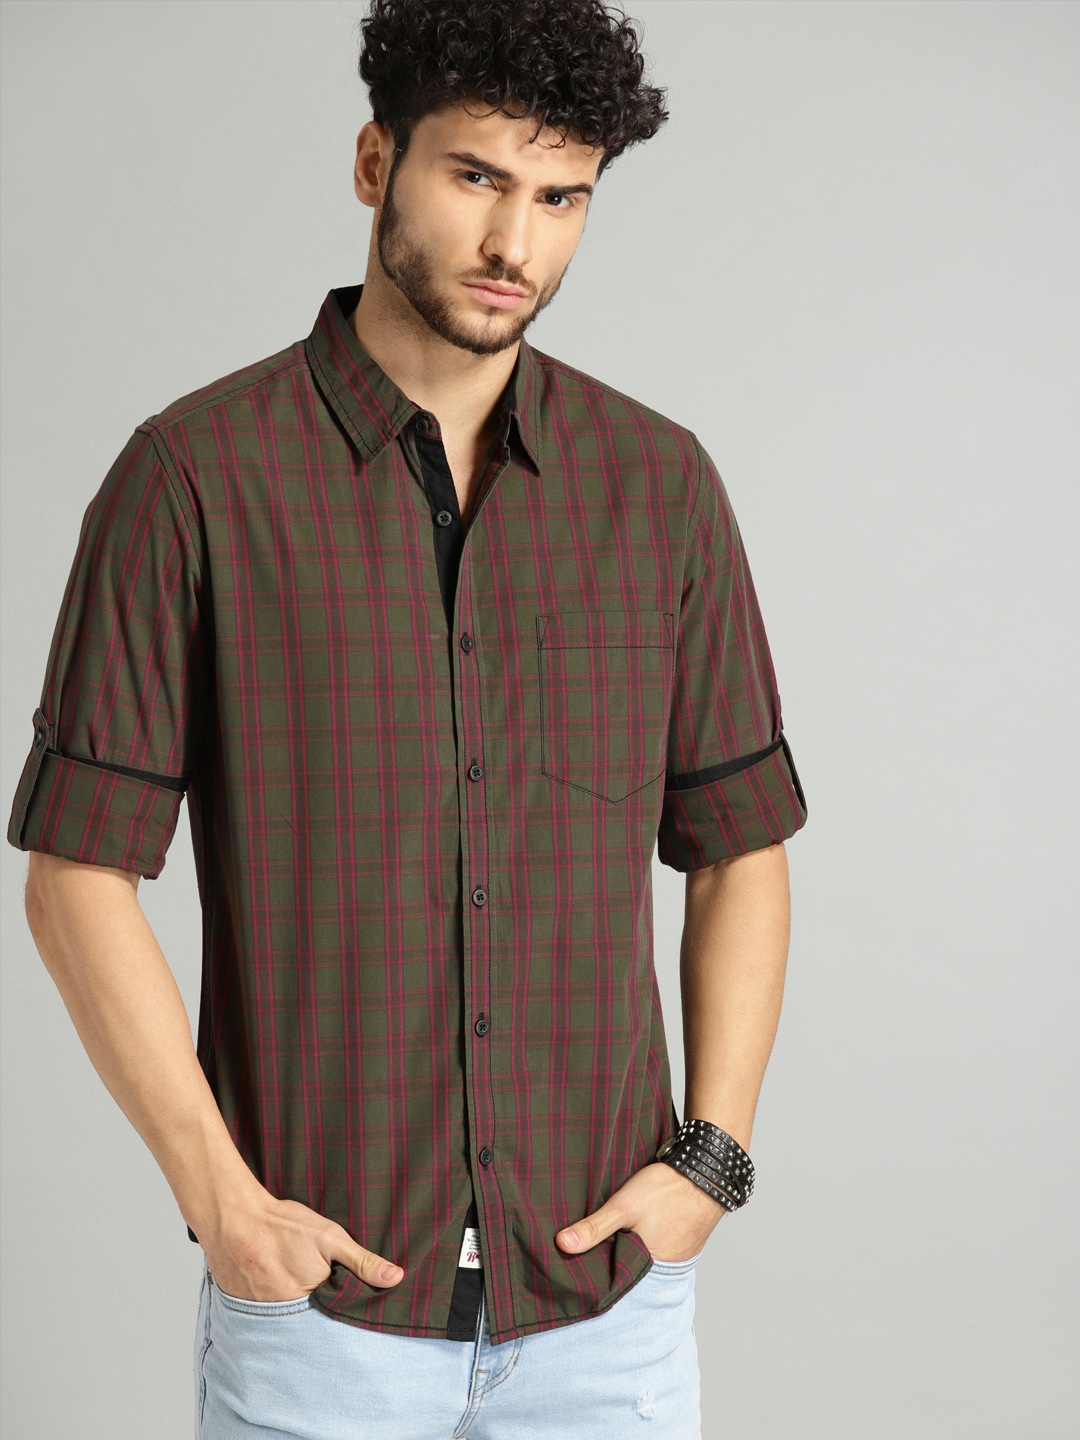 Buy The Roadster Lifestyle Co Men Olive Green & Red Checked Casual ...